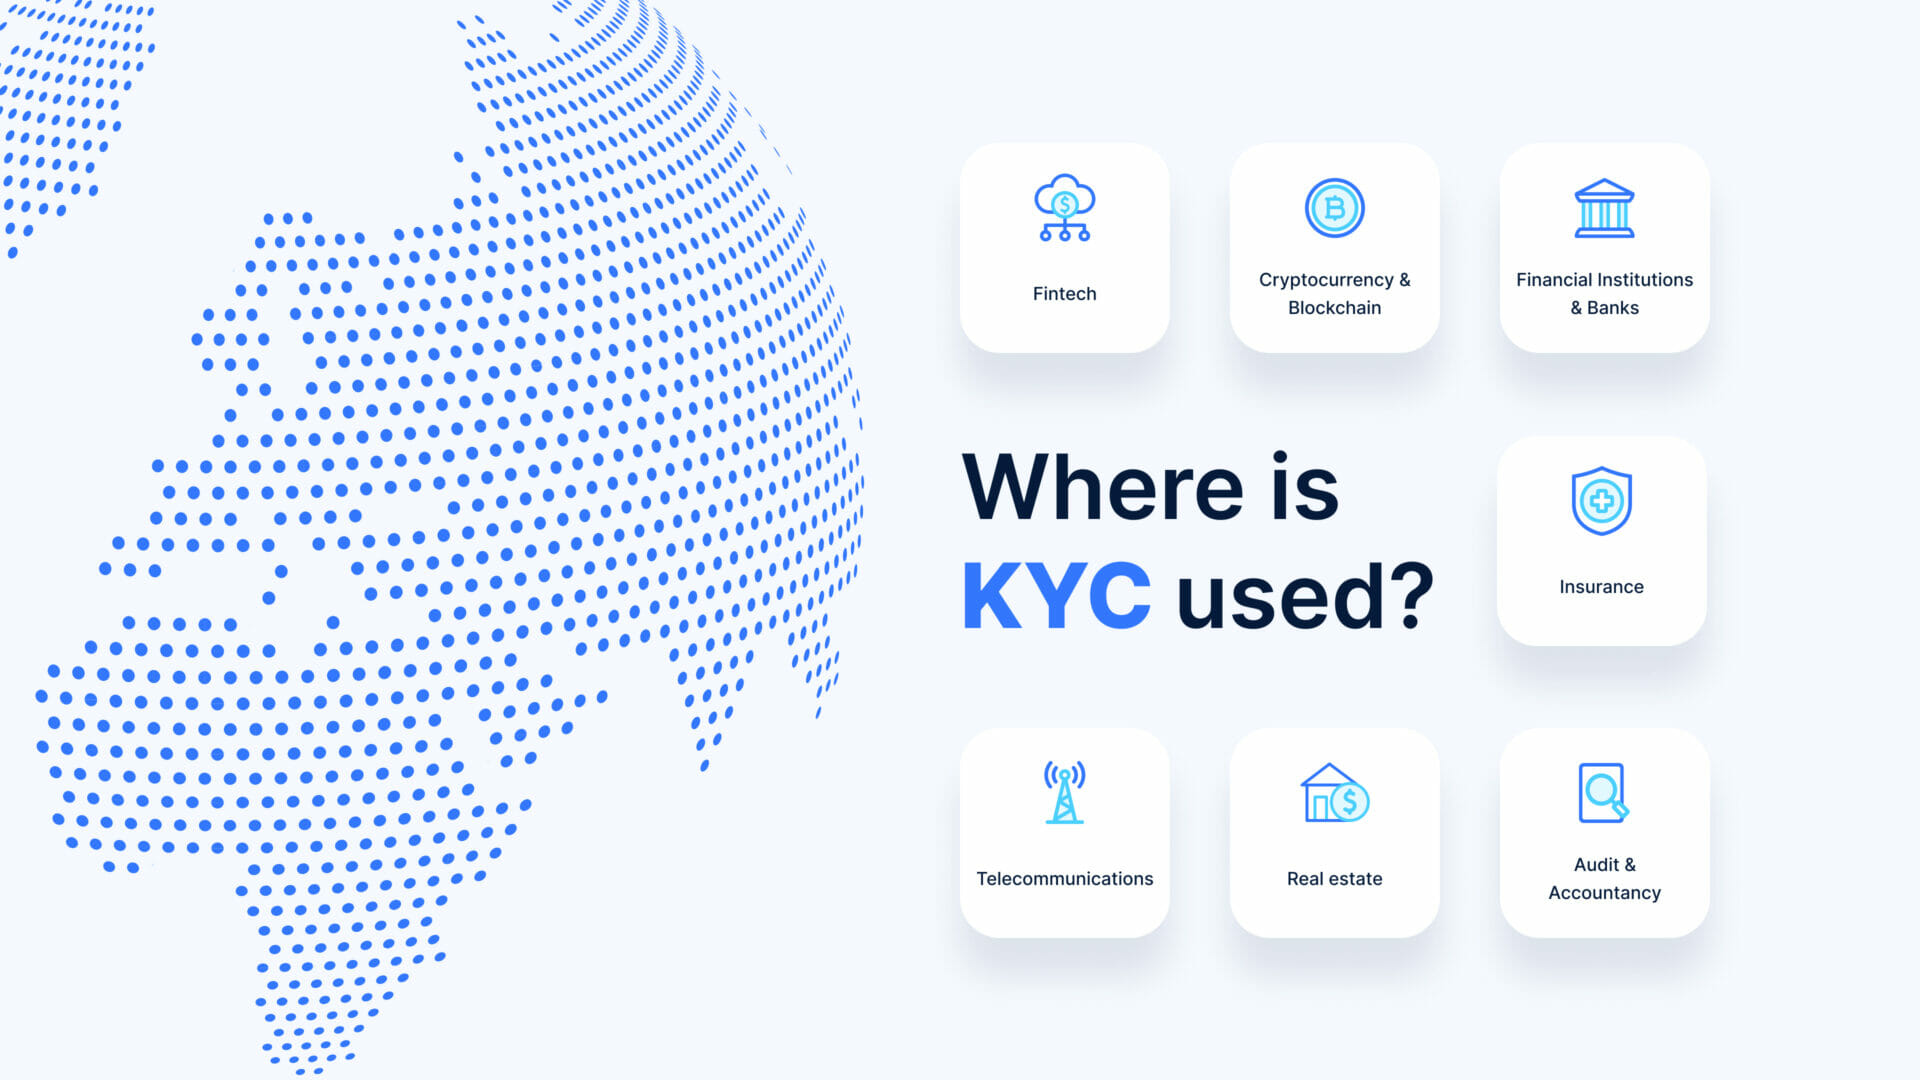 Where is KYC used?